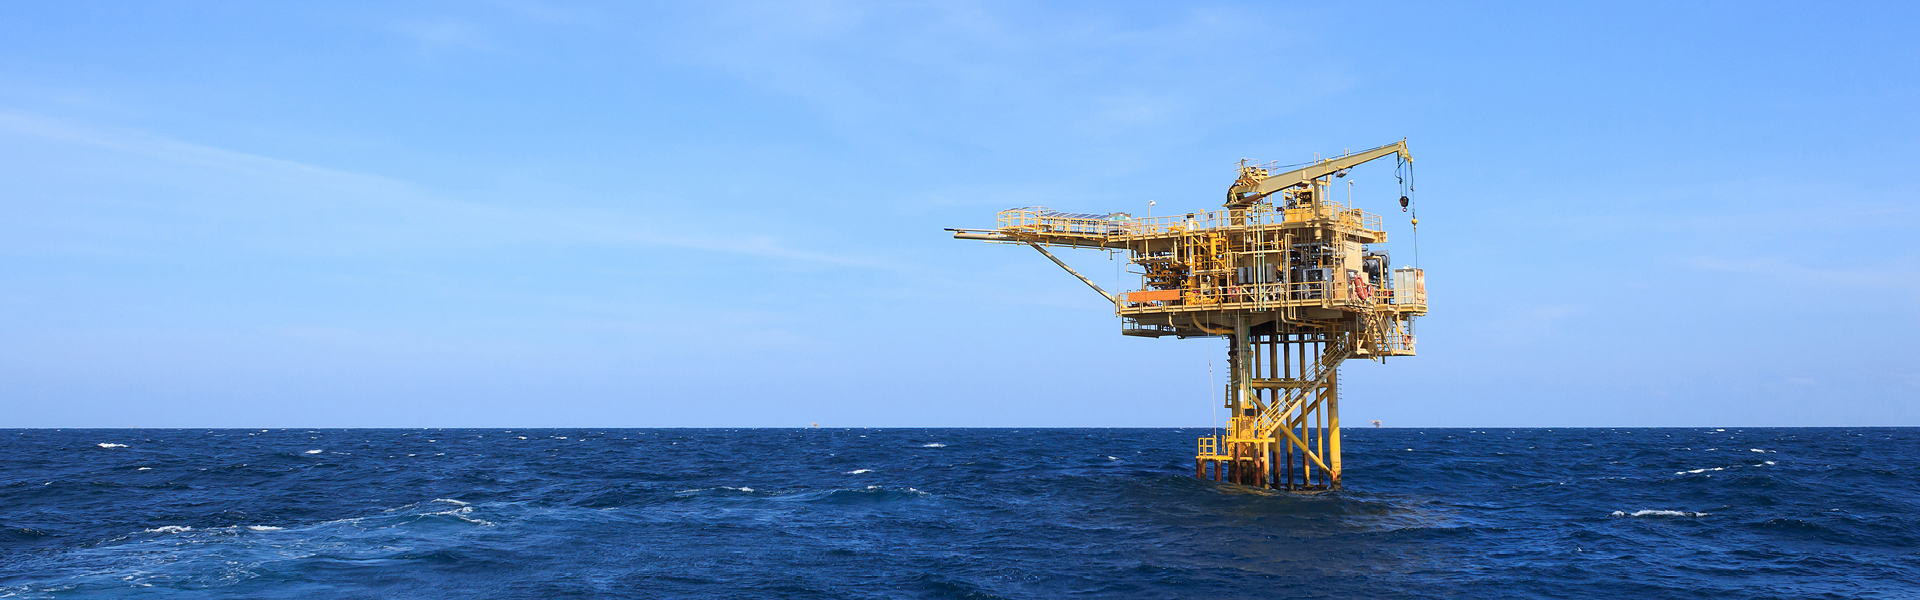 Engineering Solutions | Oil & Gas Industry